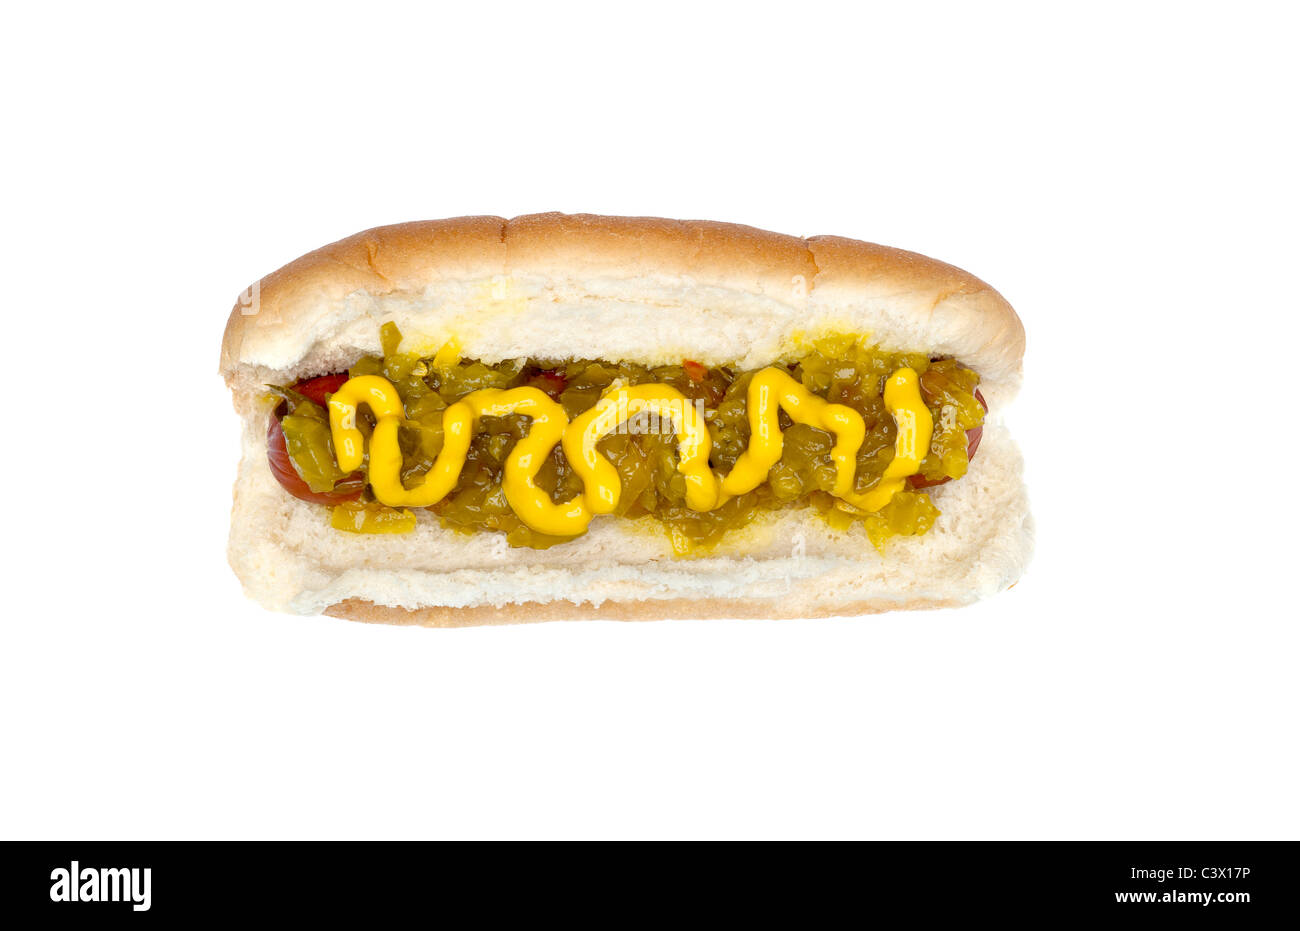 A freshly grilled hotdog with mustard and relish Stock Photo